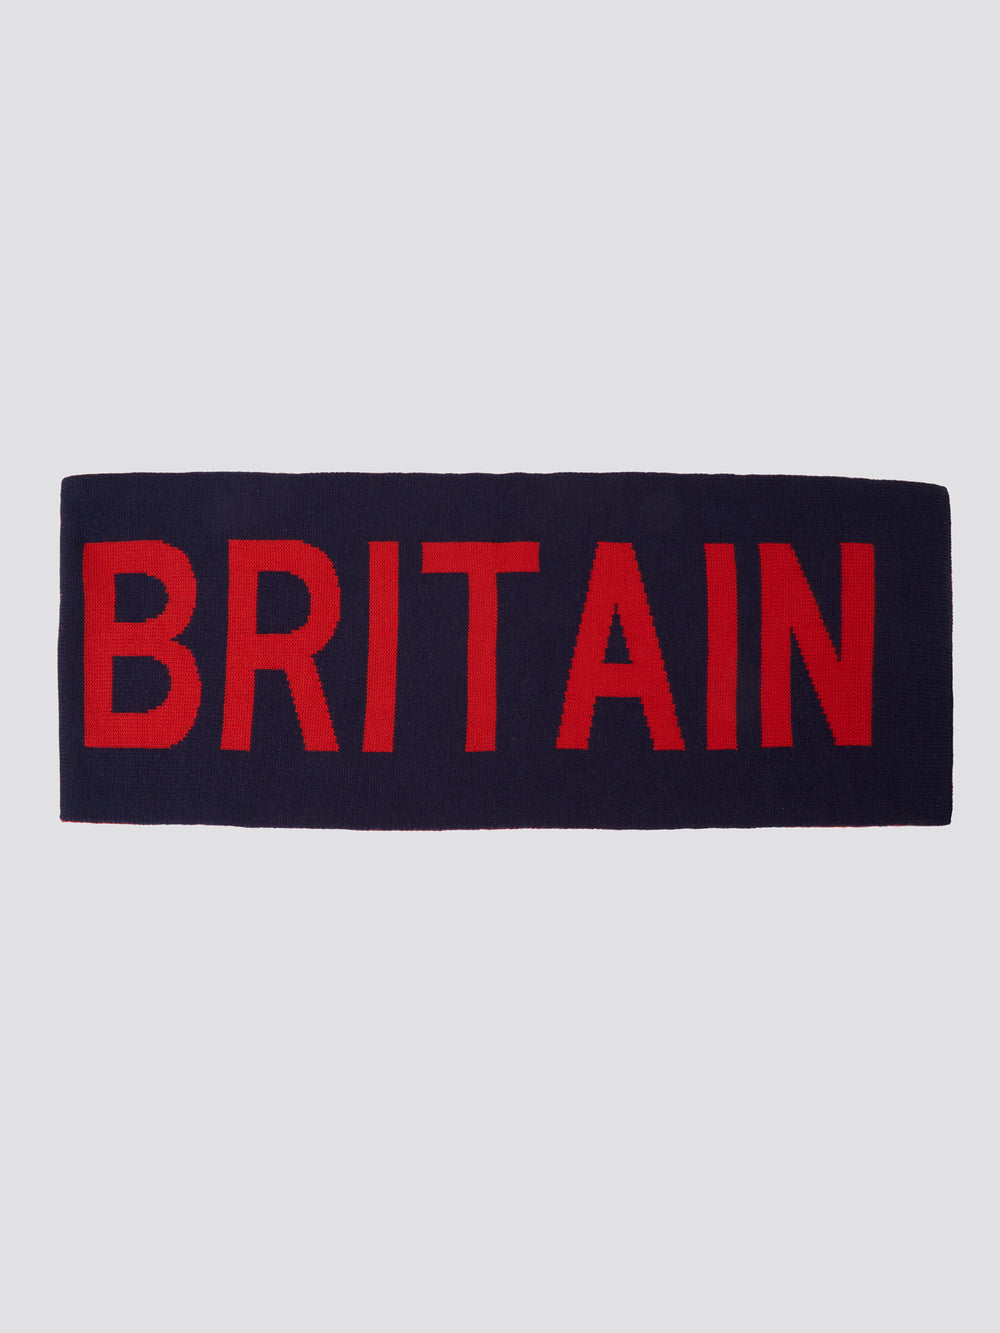 Team GB, Ben Sherman, Winter Scarf, Official 2022 Winter Olympics, Limited Edition Britain Accessory, Closing Ceremony, Navy, Side